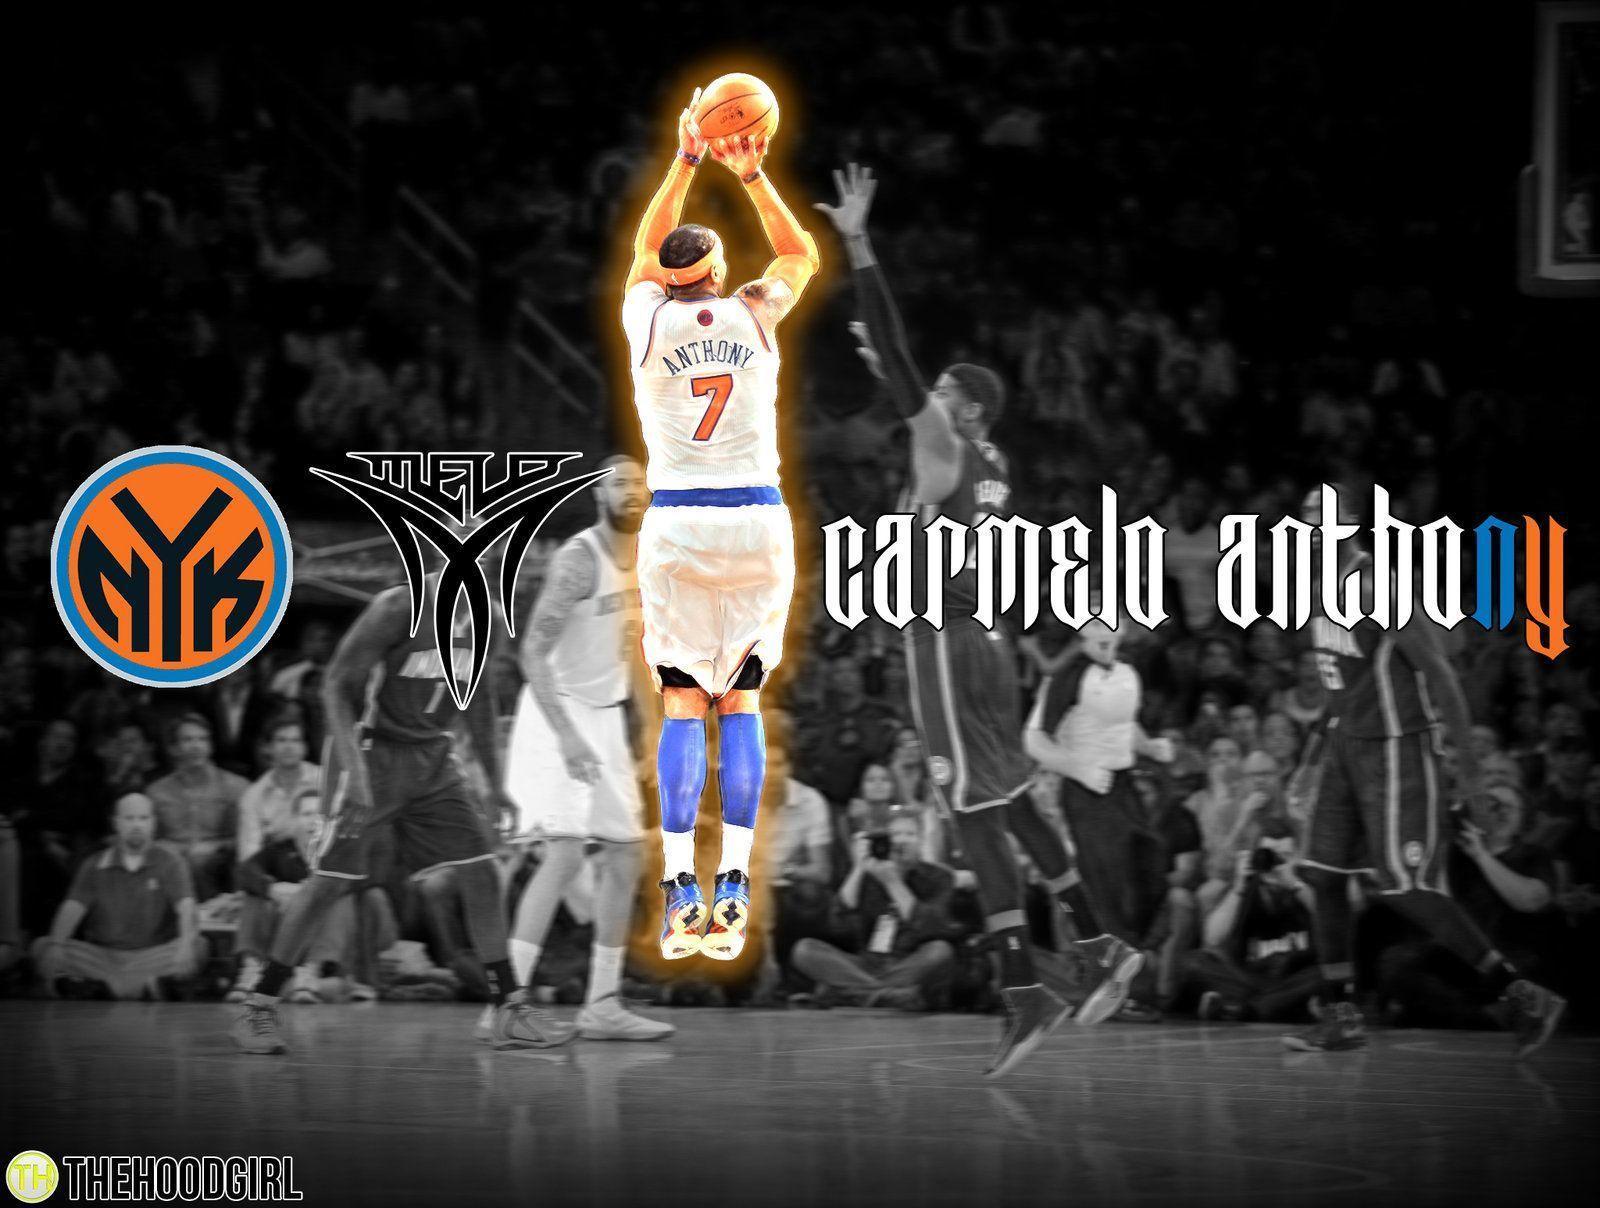 Carmelo Anthony Playoffs Round 2 vs. Pacers